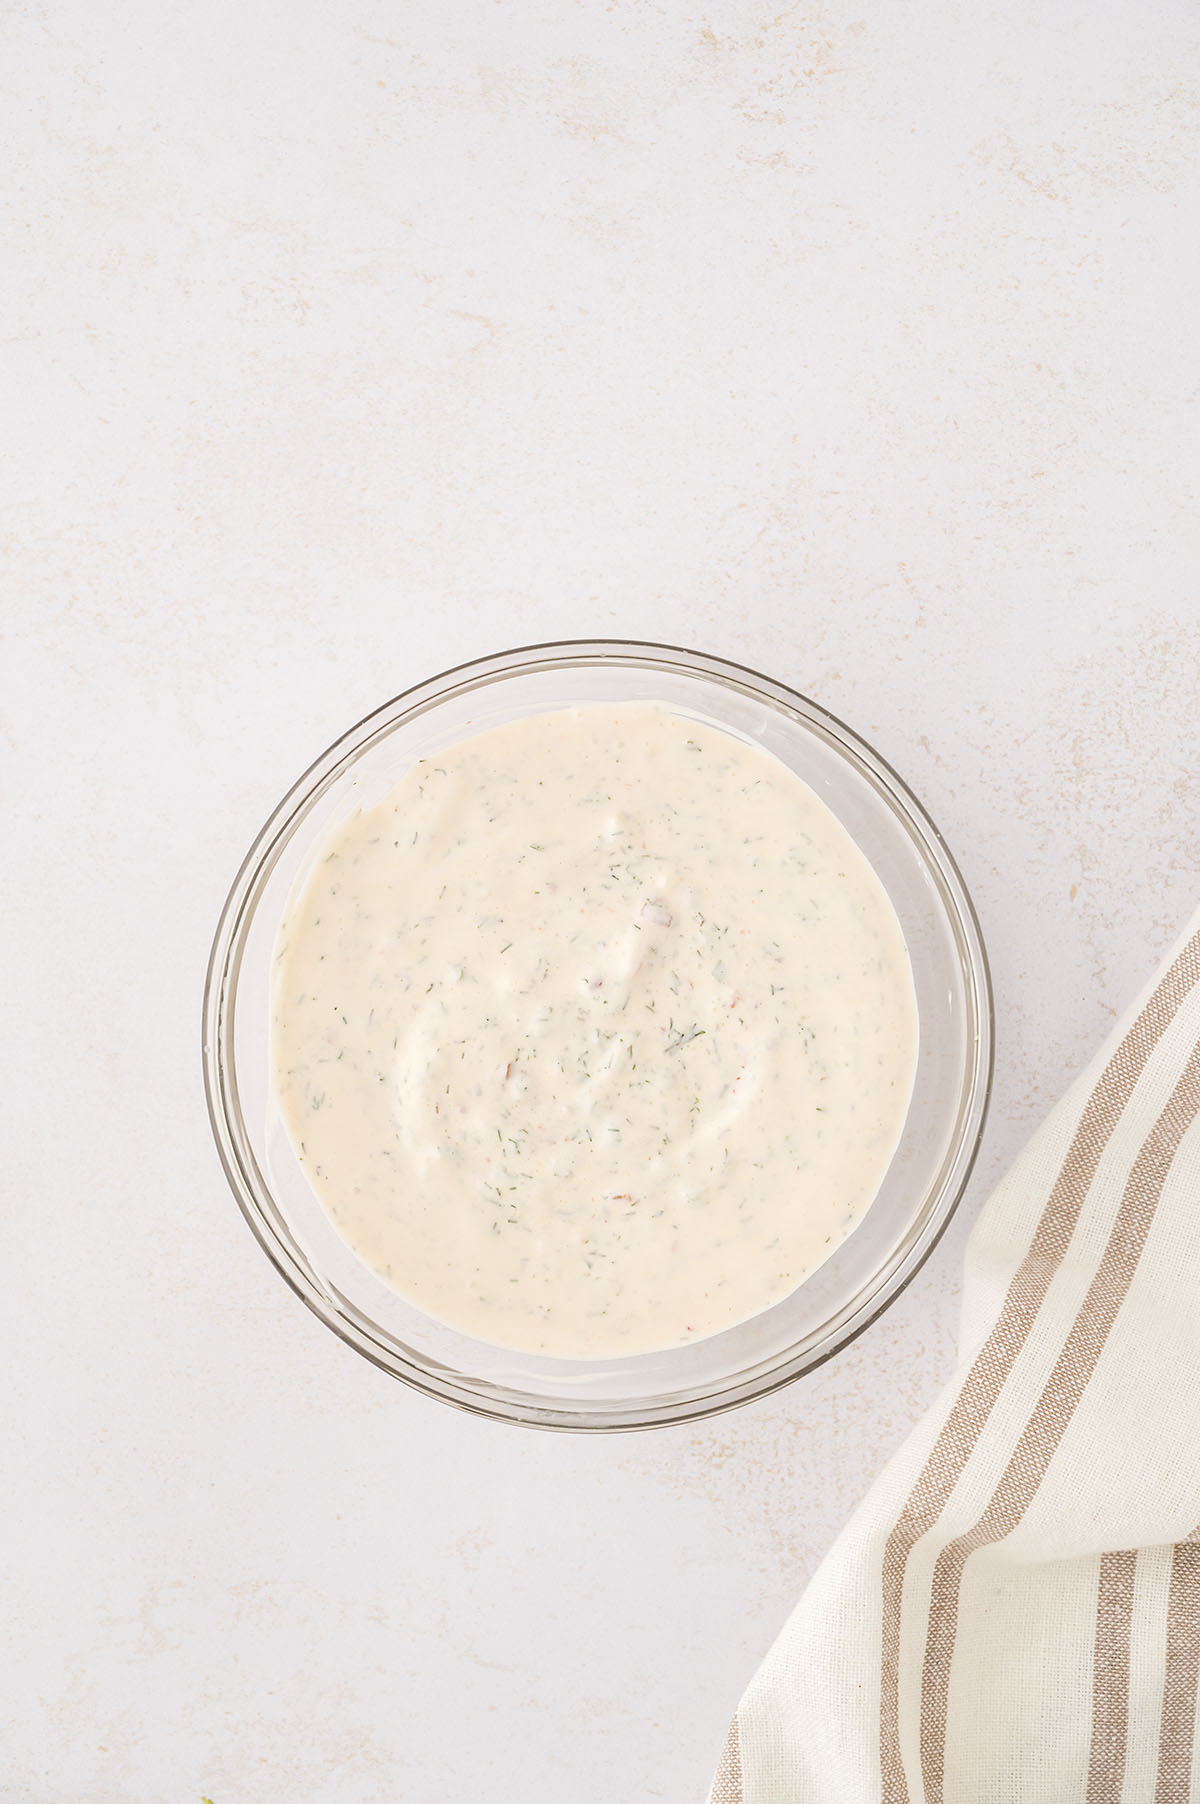 Homemade ranch dressing in a clear glass bowl.